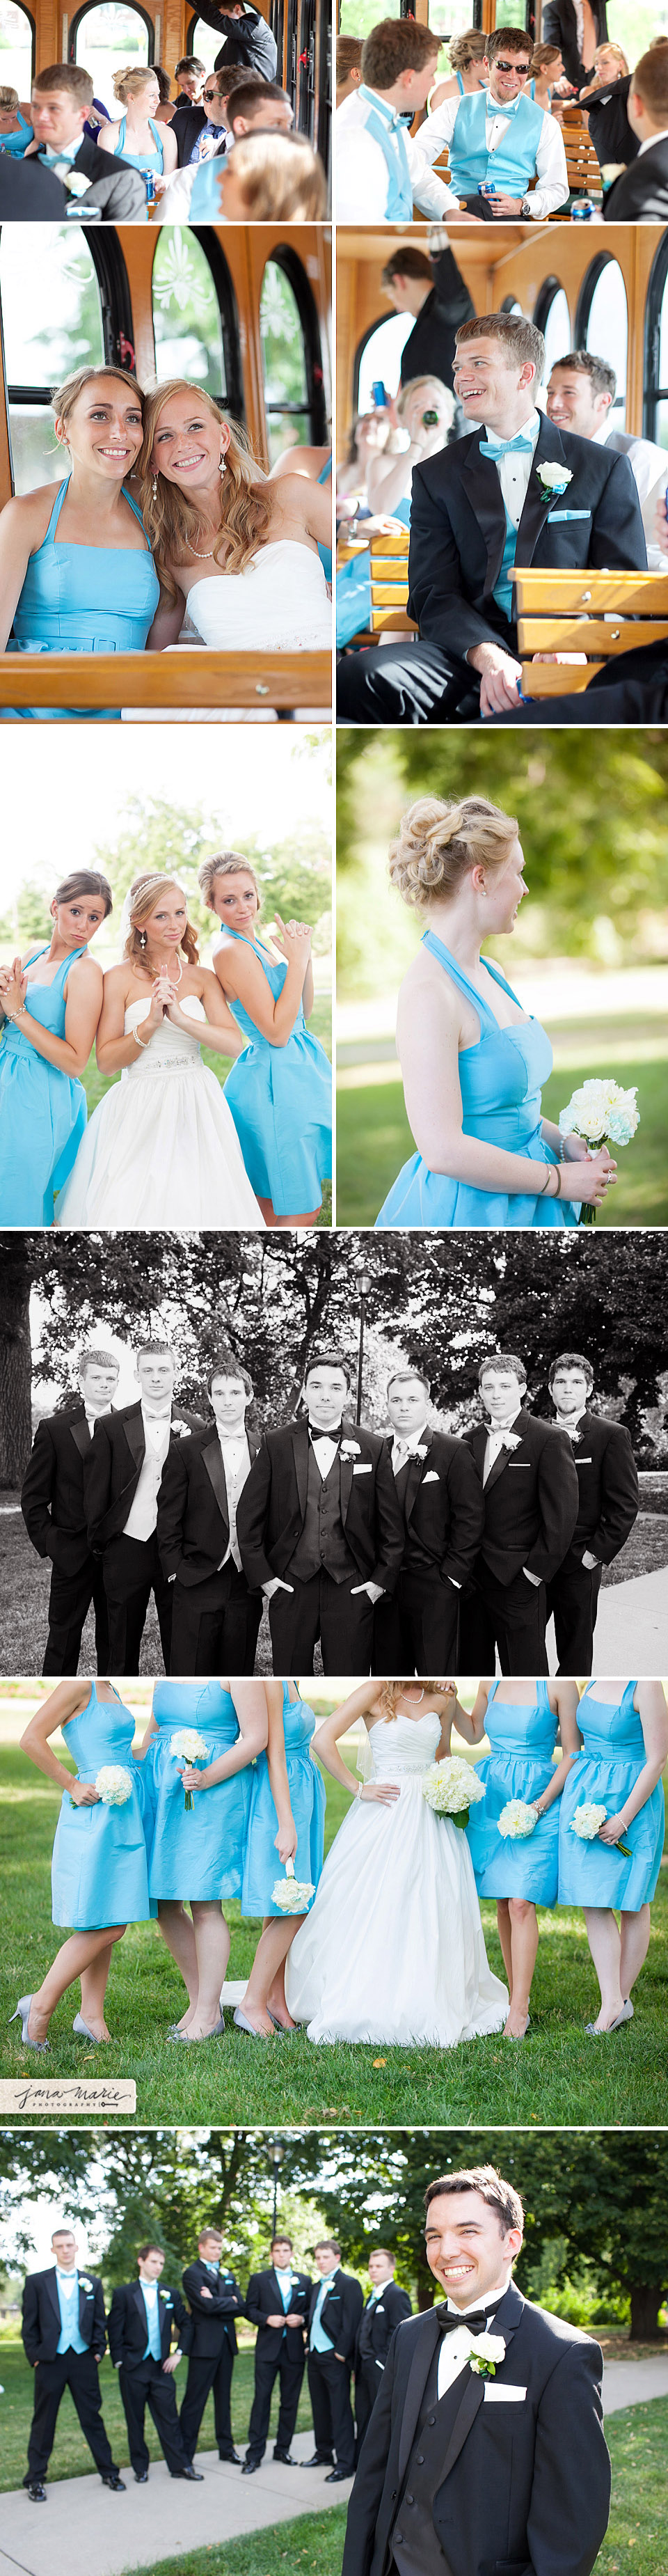 Kansas City weddings, Loose Park, Bridal party pictures, Jana Marler, dresses with pockets